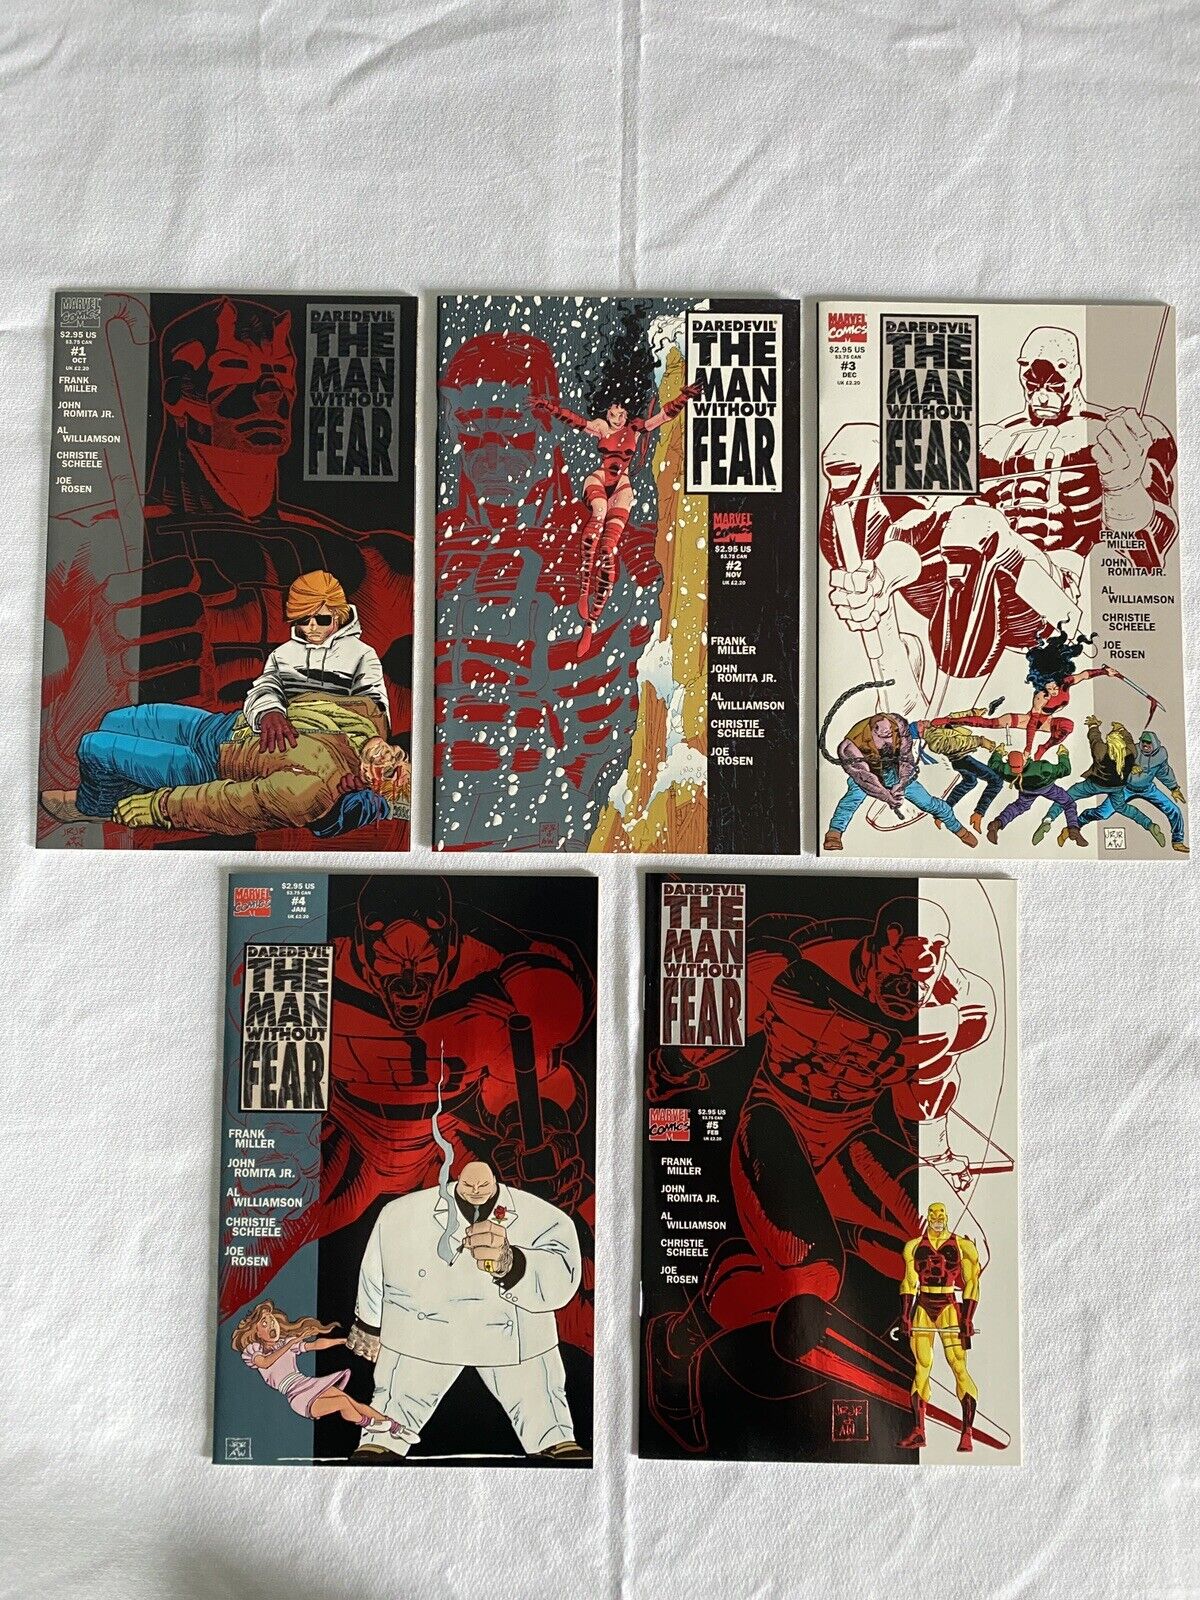 Daredevil: The Man Without Fear #1-5 1993-1994. Near mint.